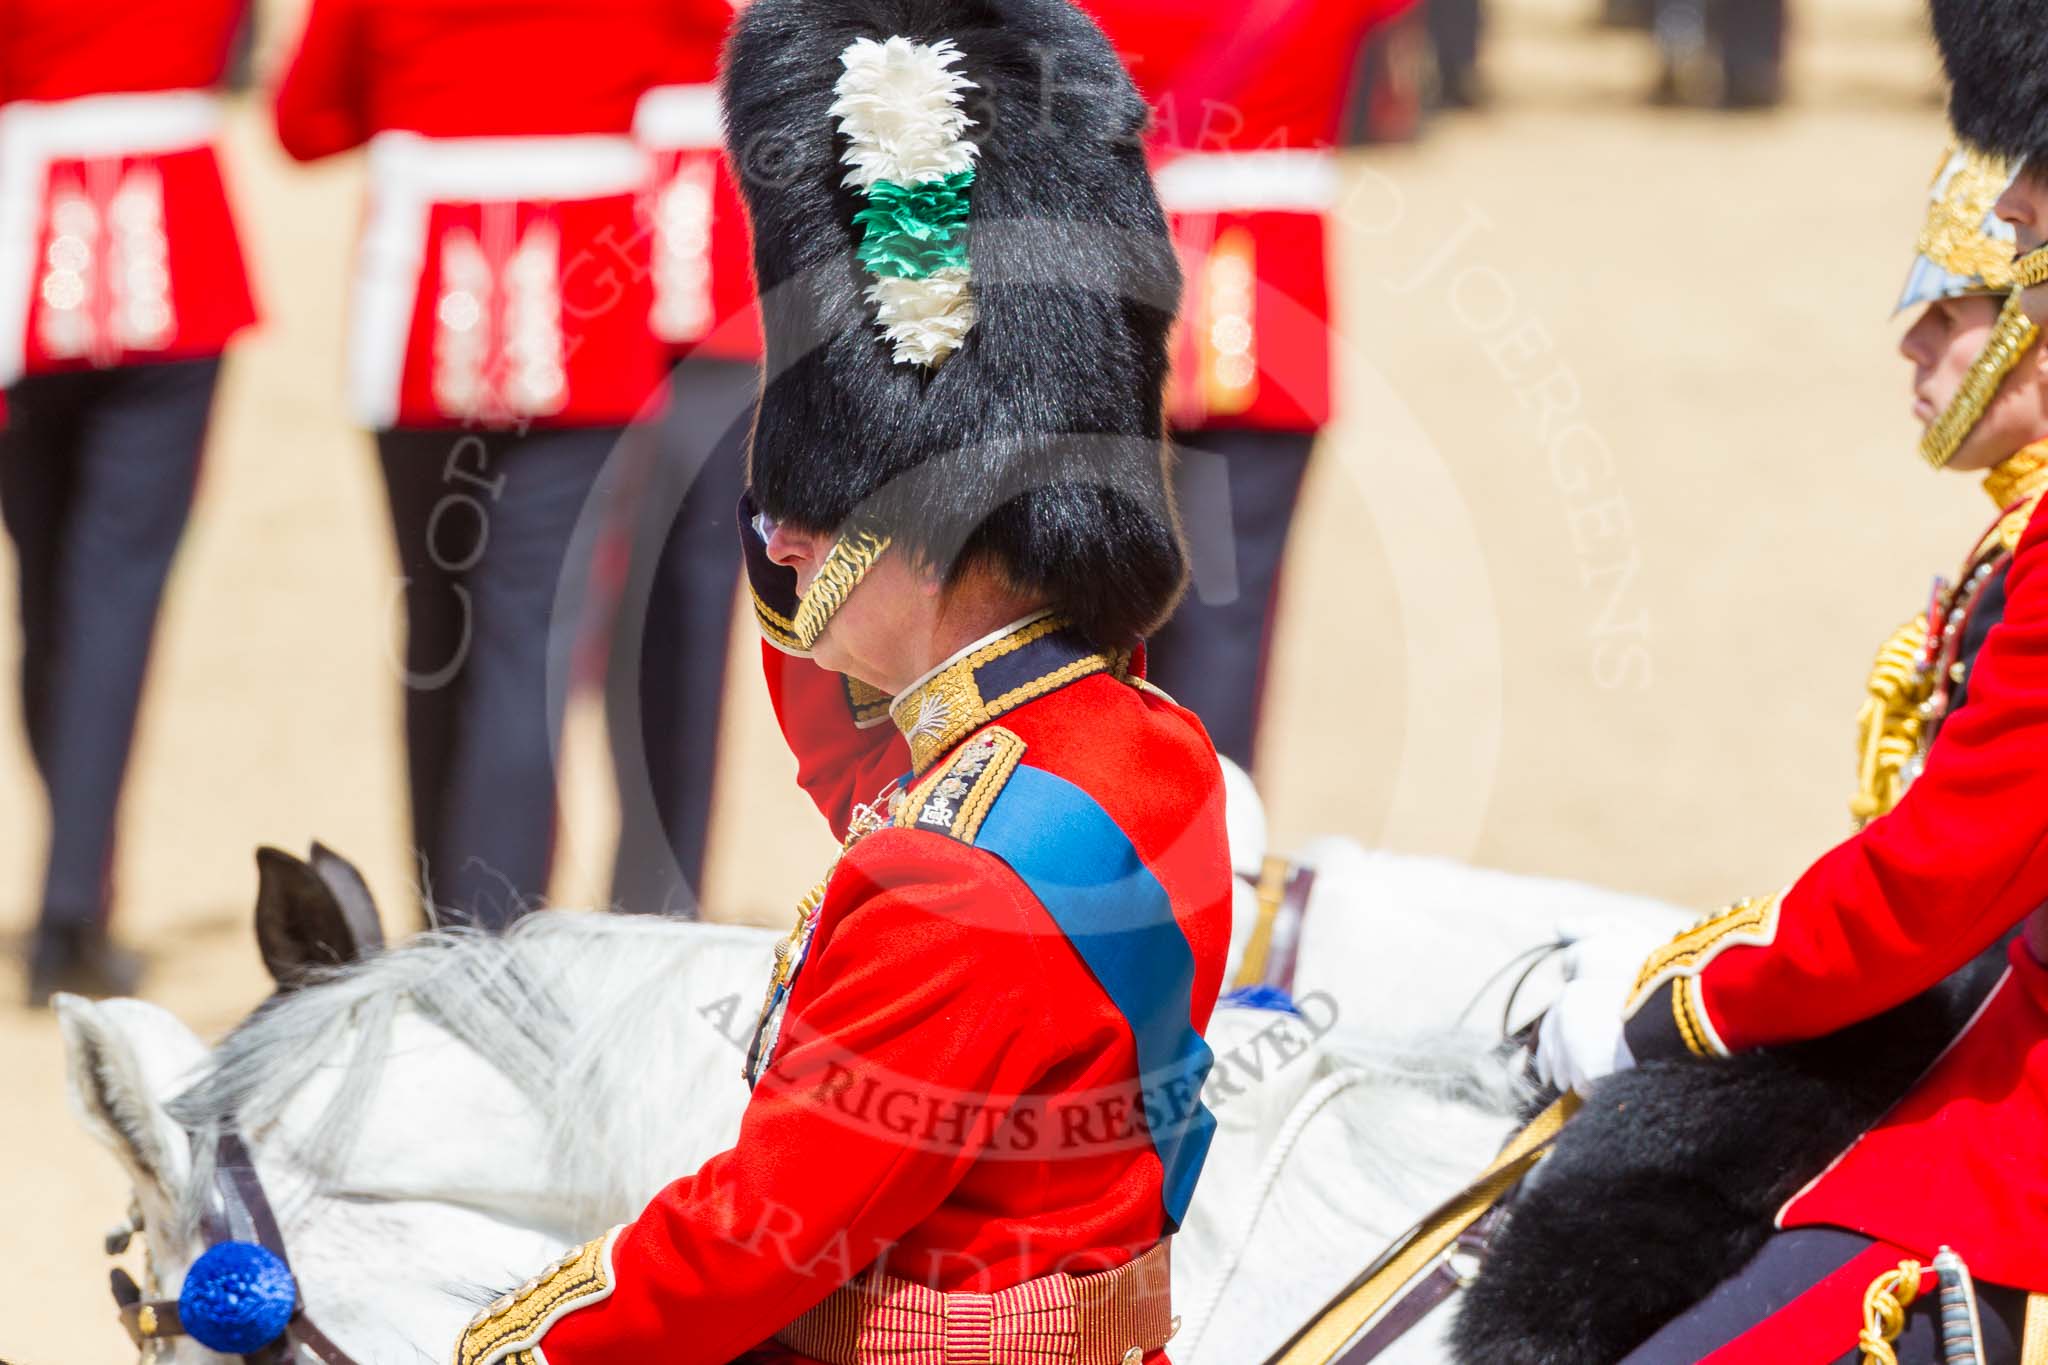 The Colonel's Review 2015.
Horse Guards Parade, Westminster,
London,

United Kingdom,
on 06 June 2015 at 11:44, image #433